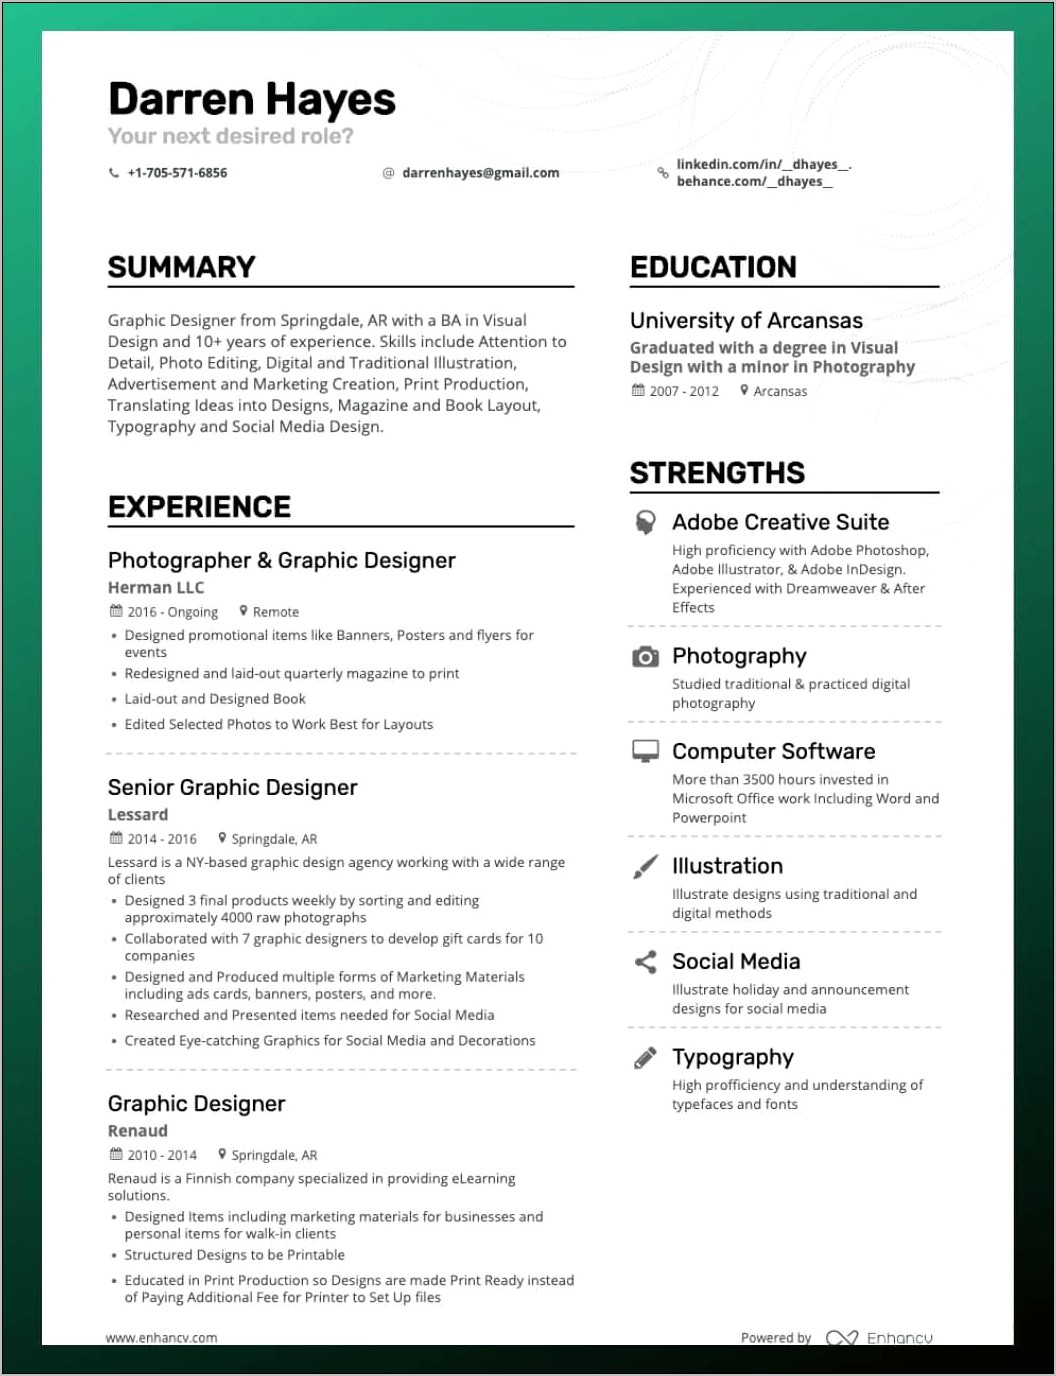 Extra Skills That Look Good On A Resume